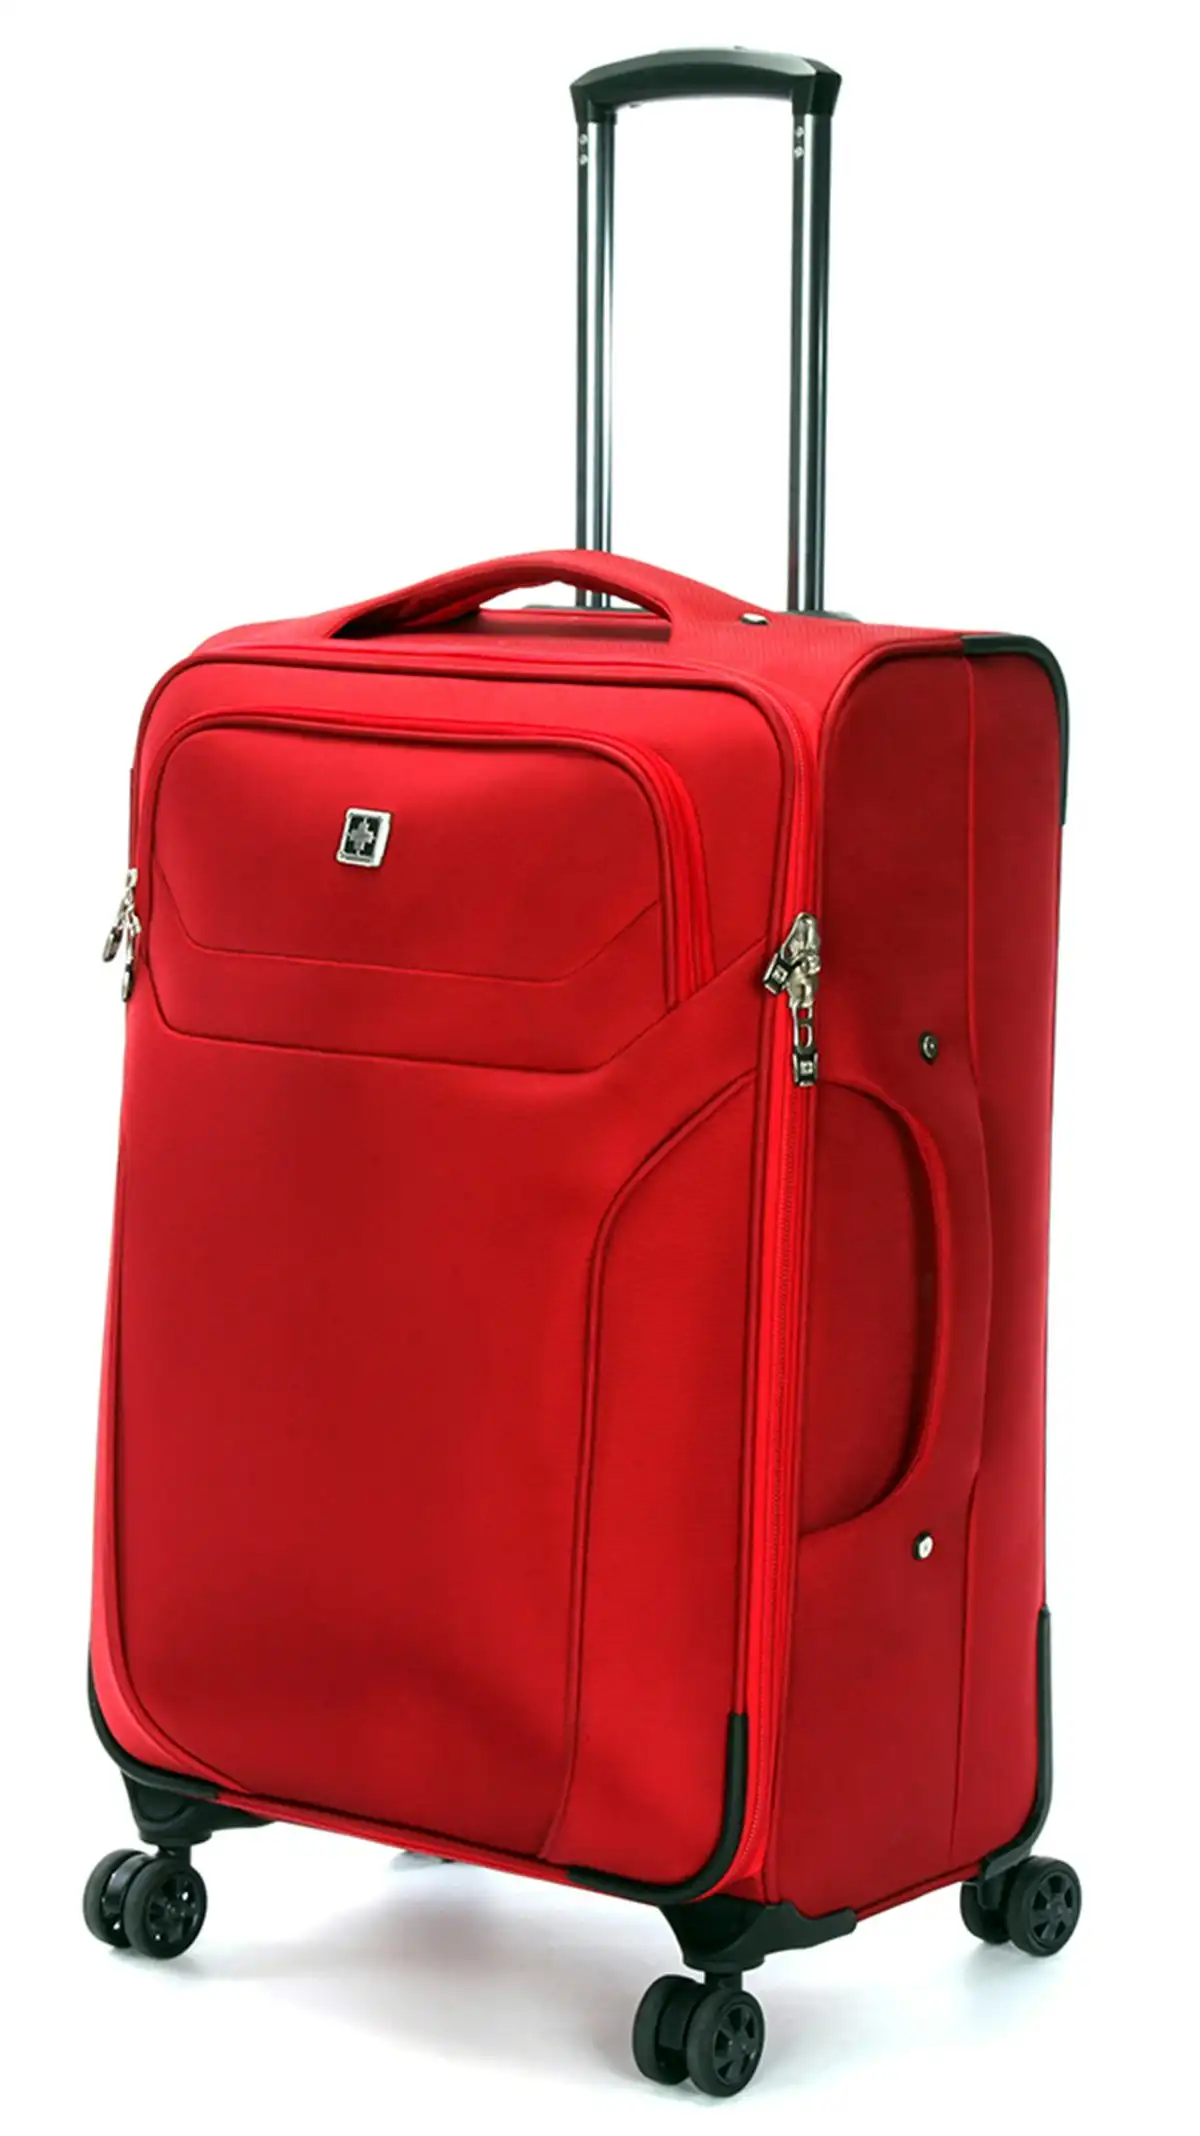 Suissewin Swiss Luggage Suitcase Lightweight 8 Wheels 360 Degree Rolling Carry on Softcase SN6005A Red